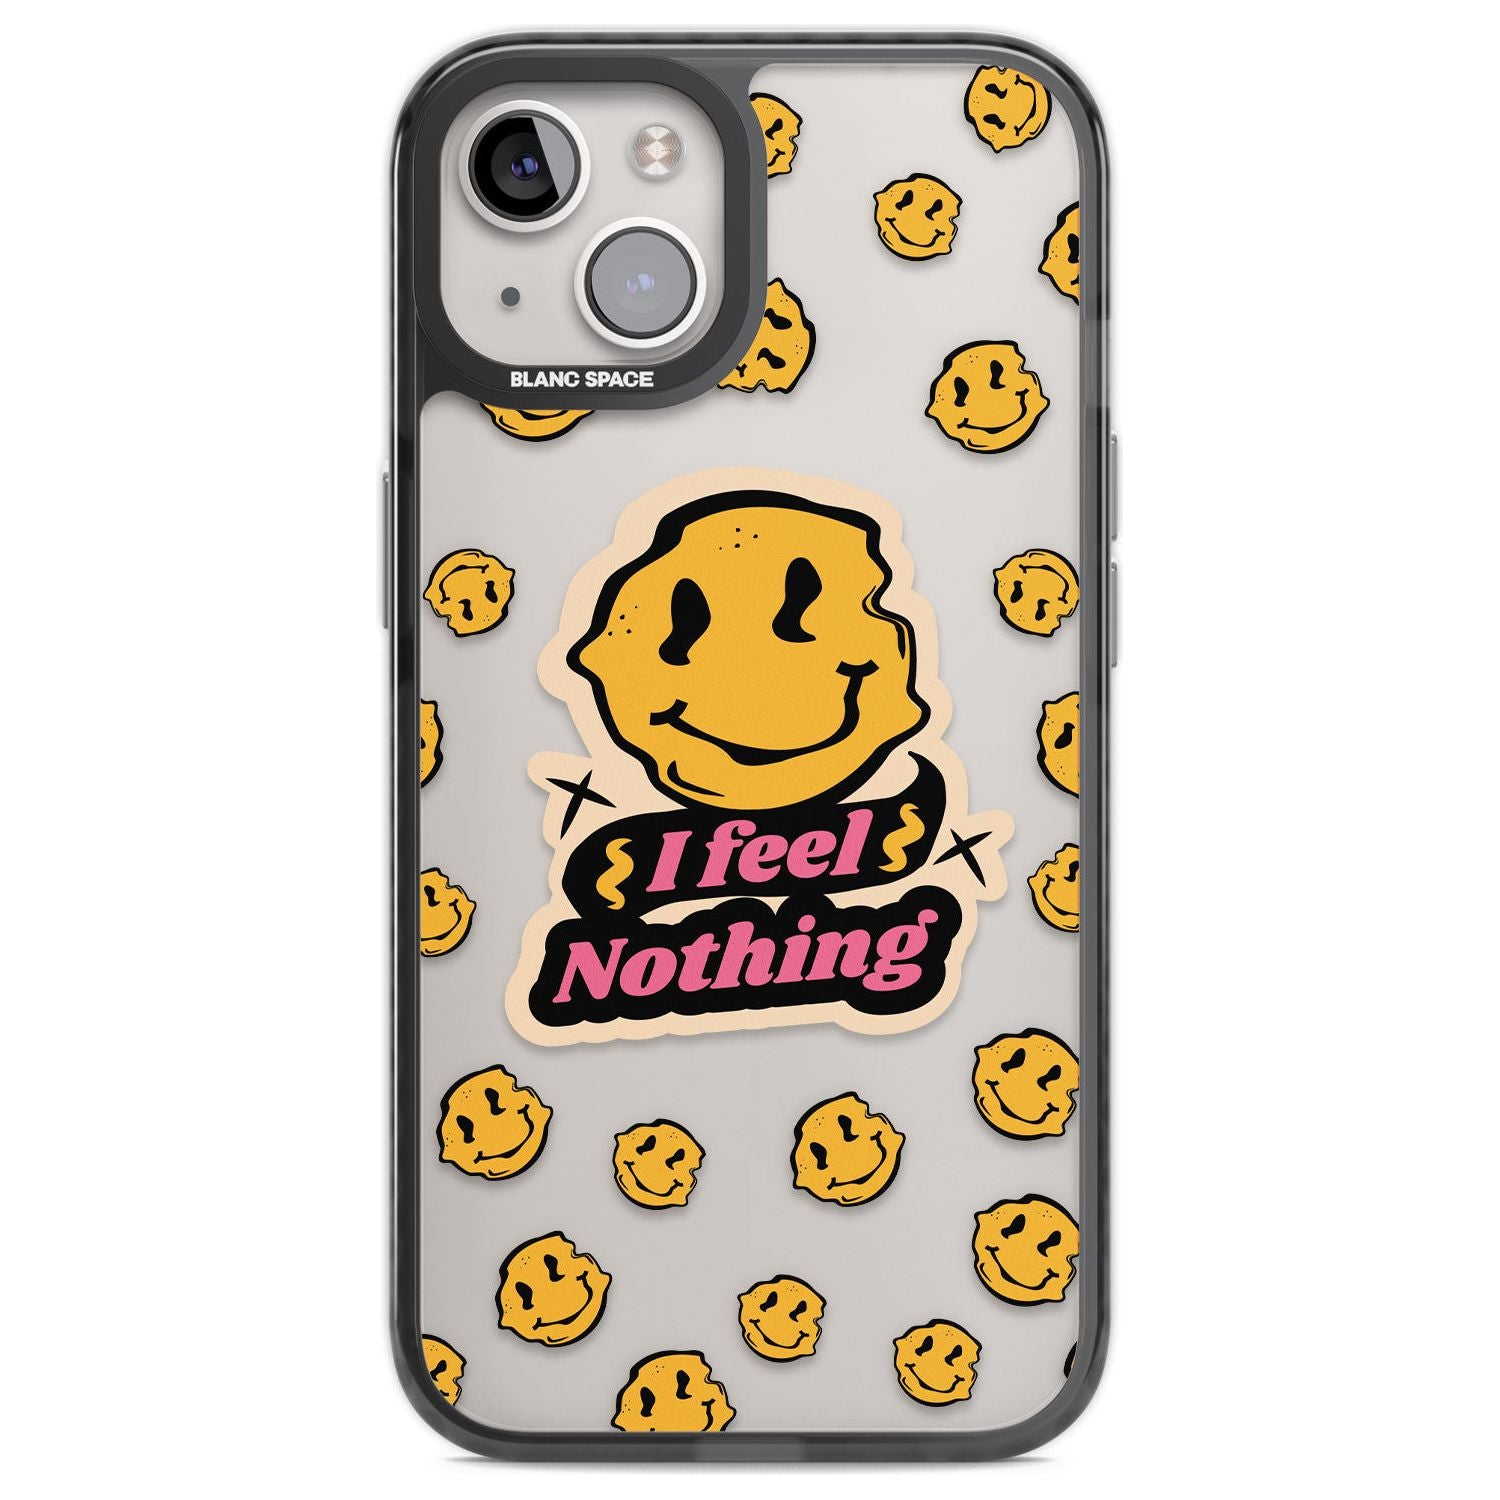 I feel nothing (Clear) Phone Case iPhone 12 / Black Impact Case,iPhone 13 / Black Impact Case,iPhone 12 Pro / Black Impact Case,iPhone 14 / Black Impact Case,iPhone 15 Plus / Black Impact Case,iPhone 15 / Black Impact Case Blanc Space